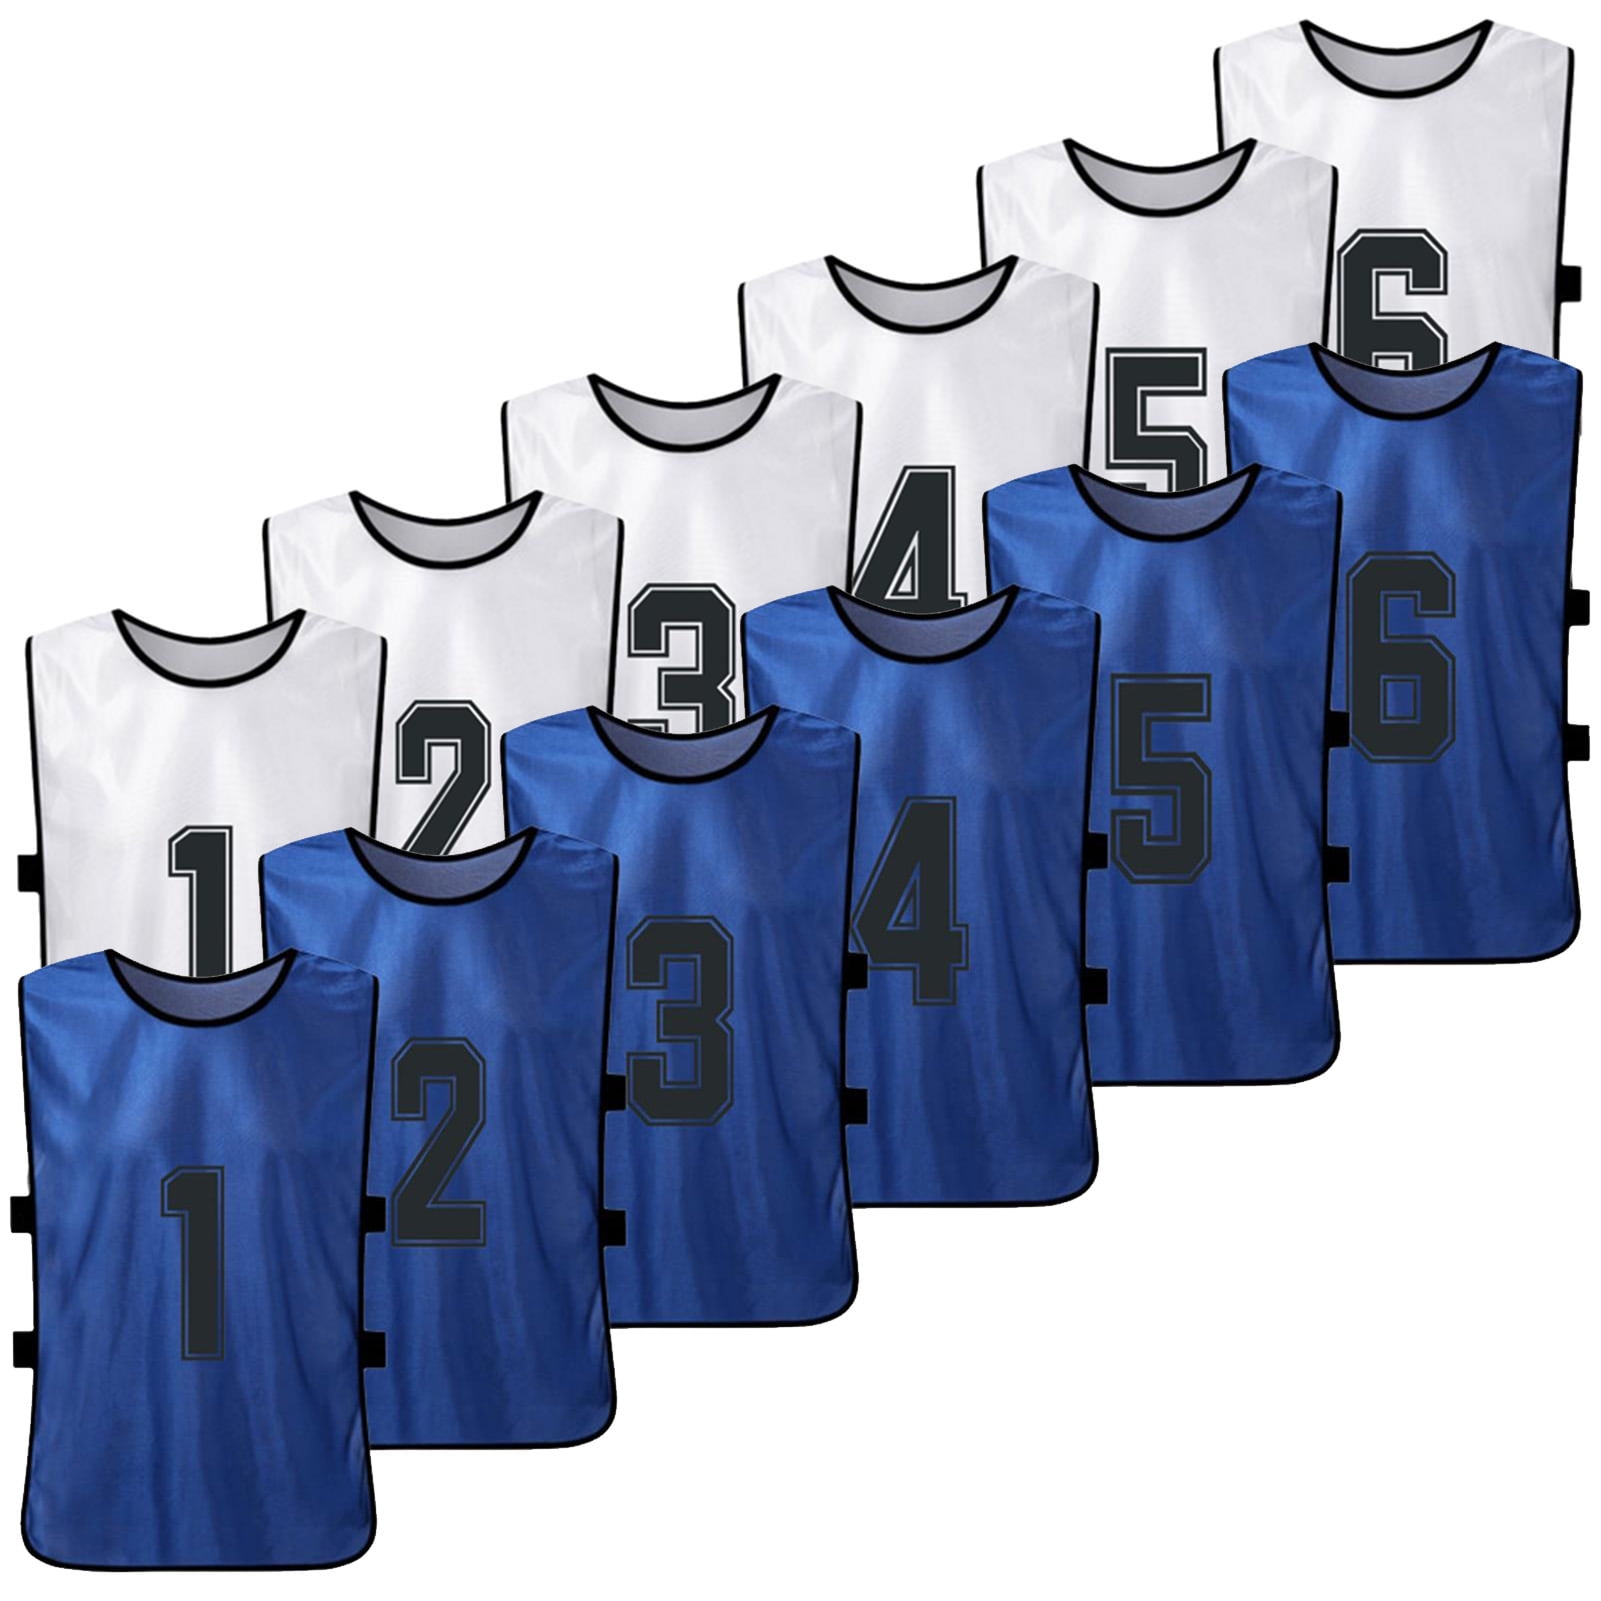 Youth Practice Sports Jerseys Scrimmage Vest for Children Soccer Team Pinnies 